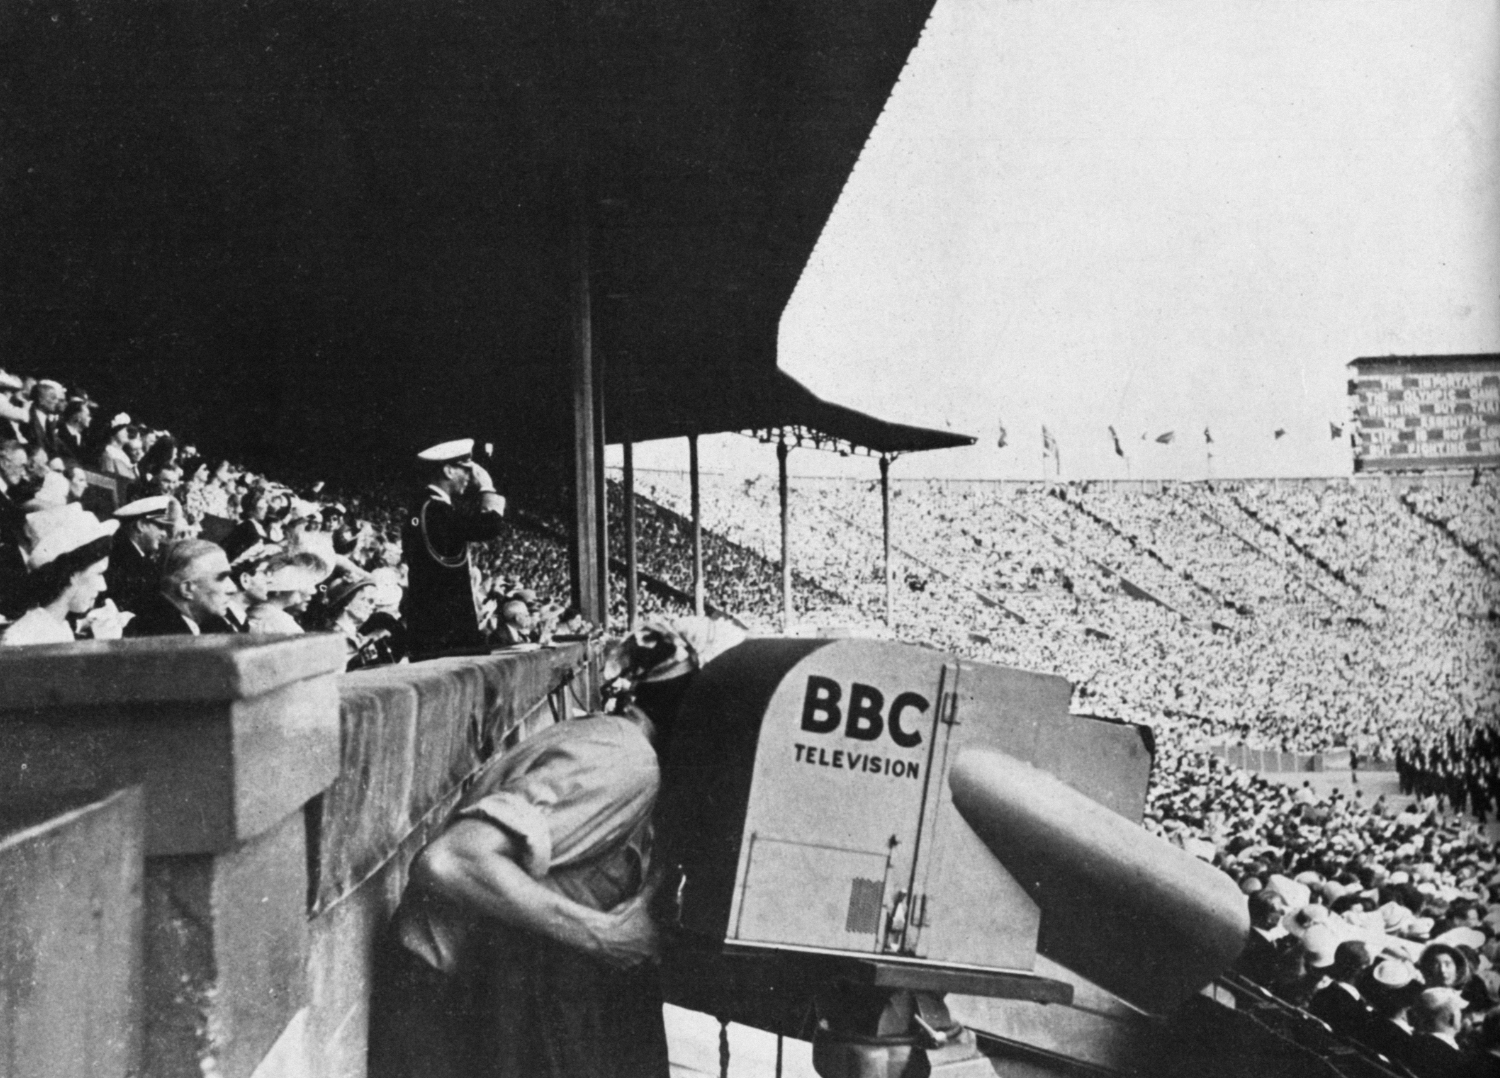 A camera high up in the stands at Wembley Stadium